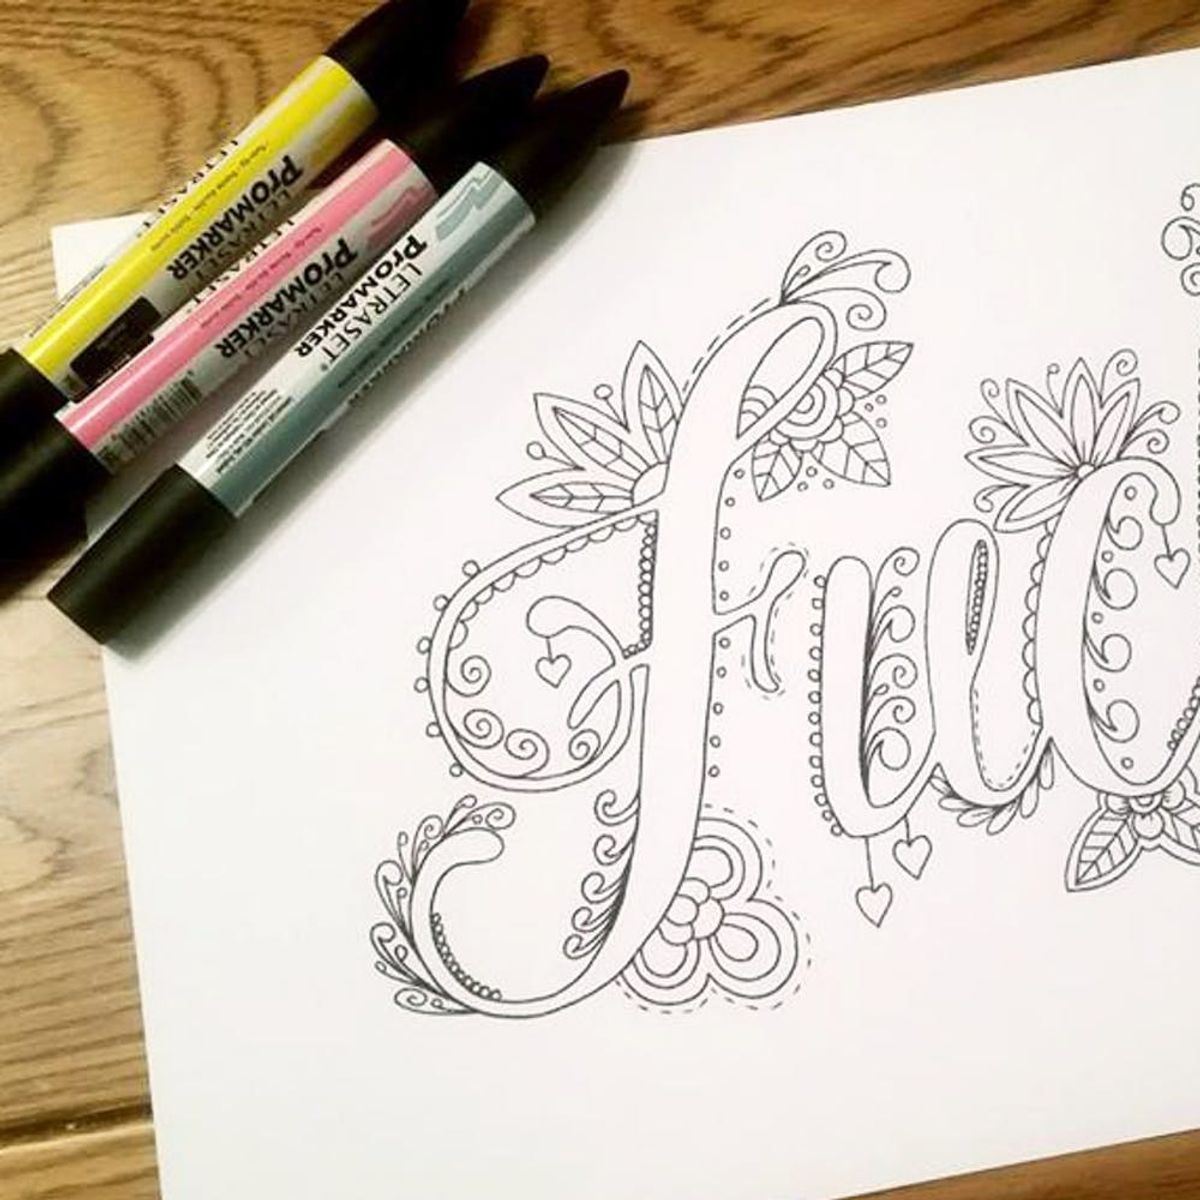 This New Coloring Book Is Made Entirely of Swear Words